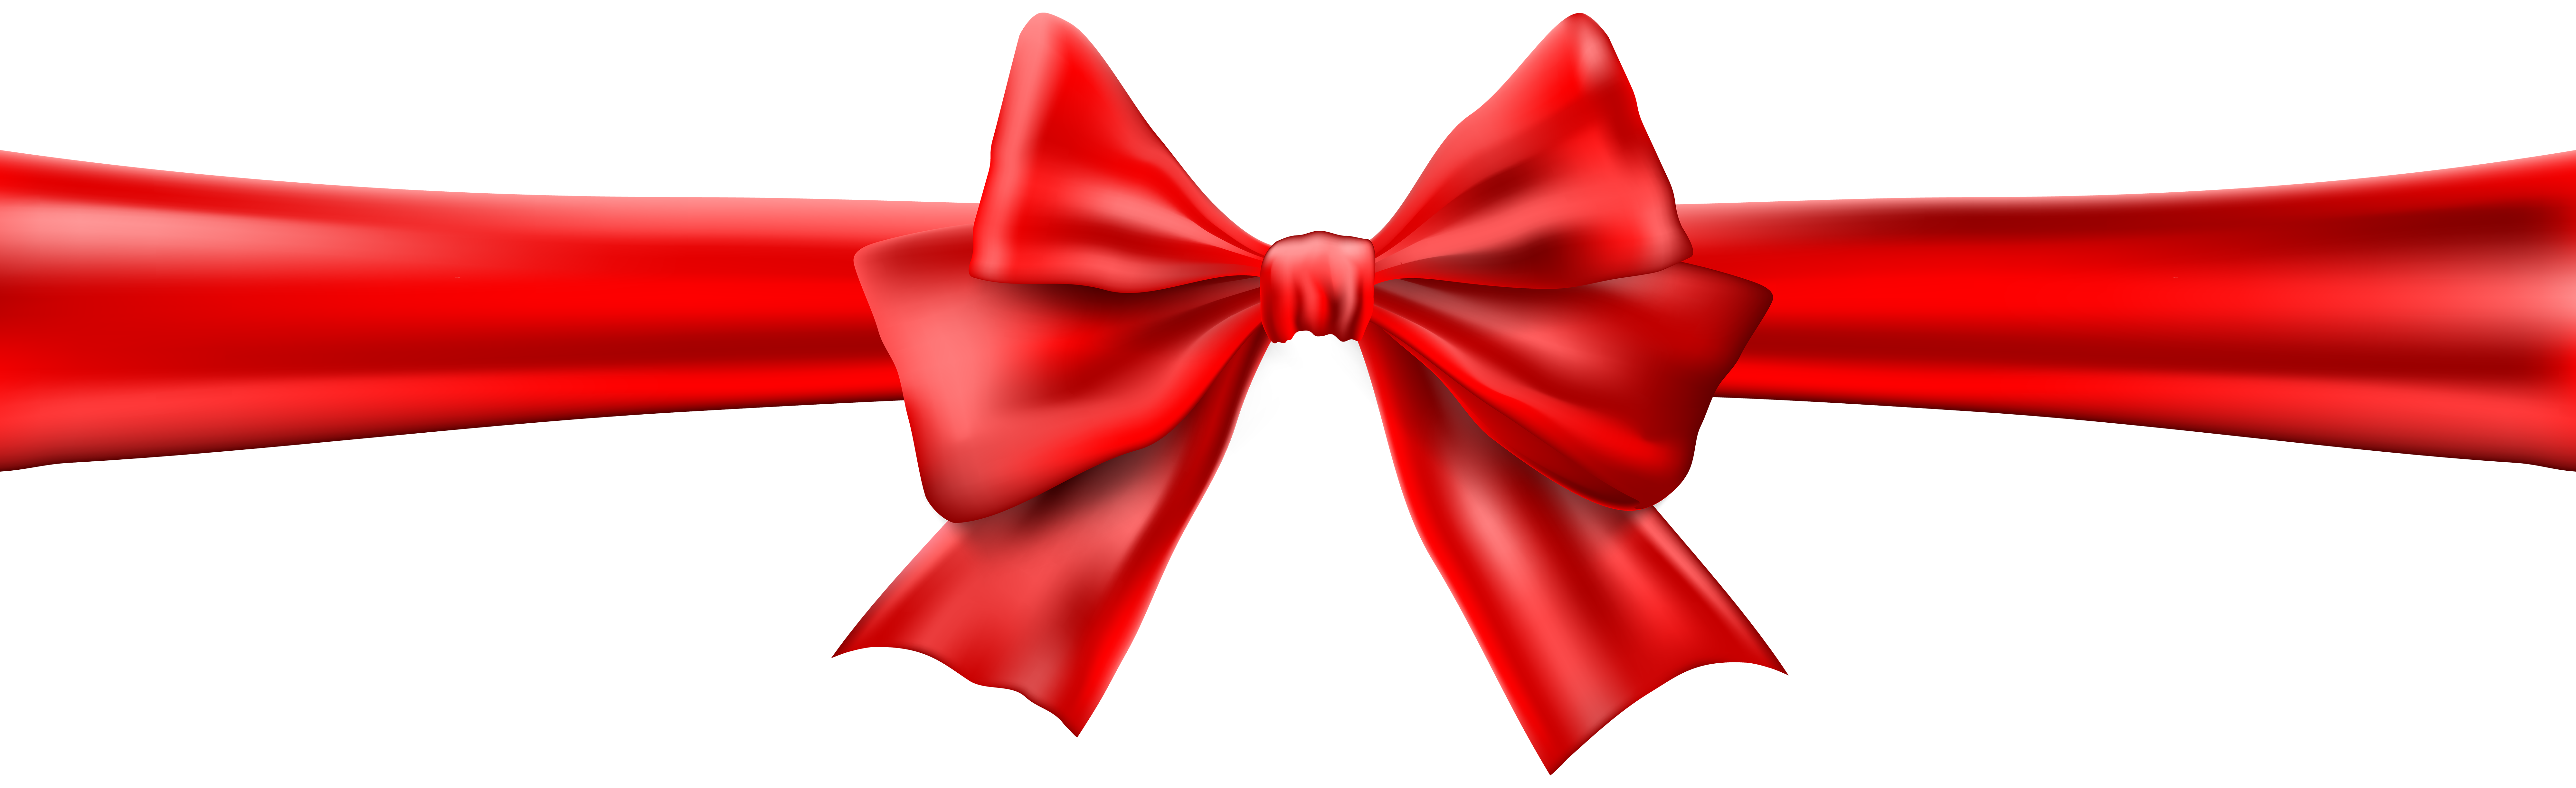 red ribbon bow PNG transparent image download, size: 3000x2019px